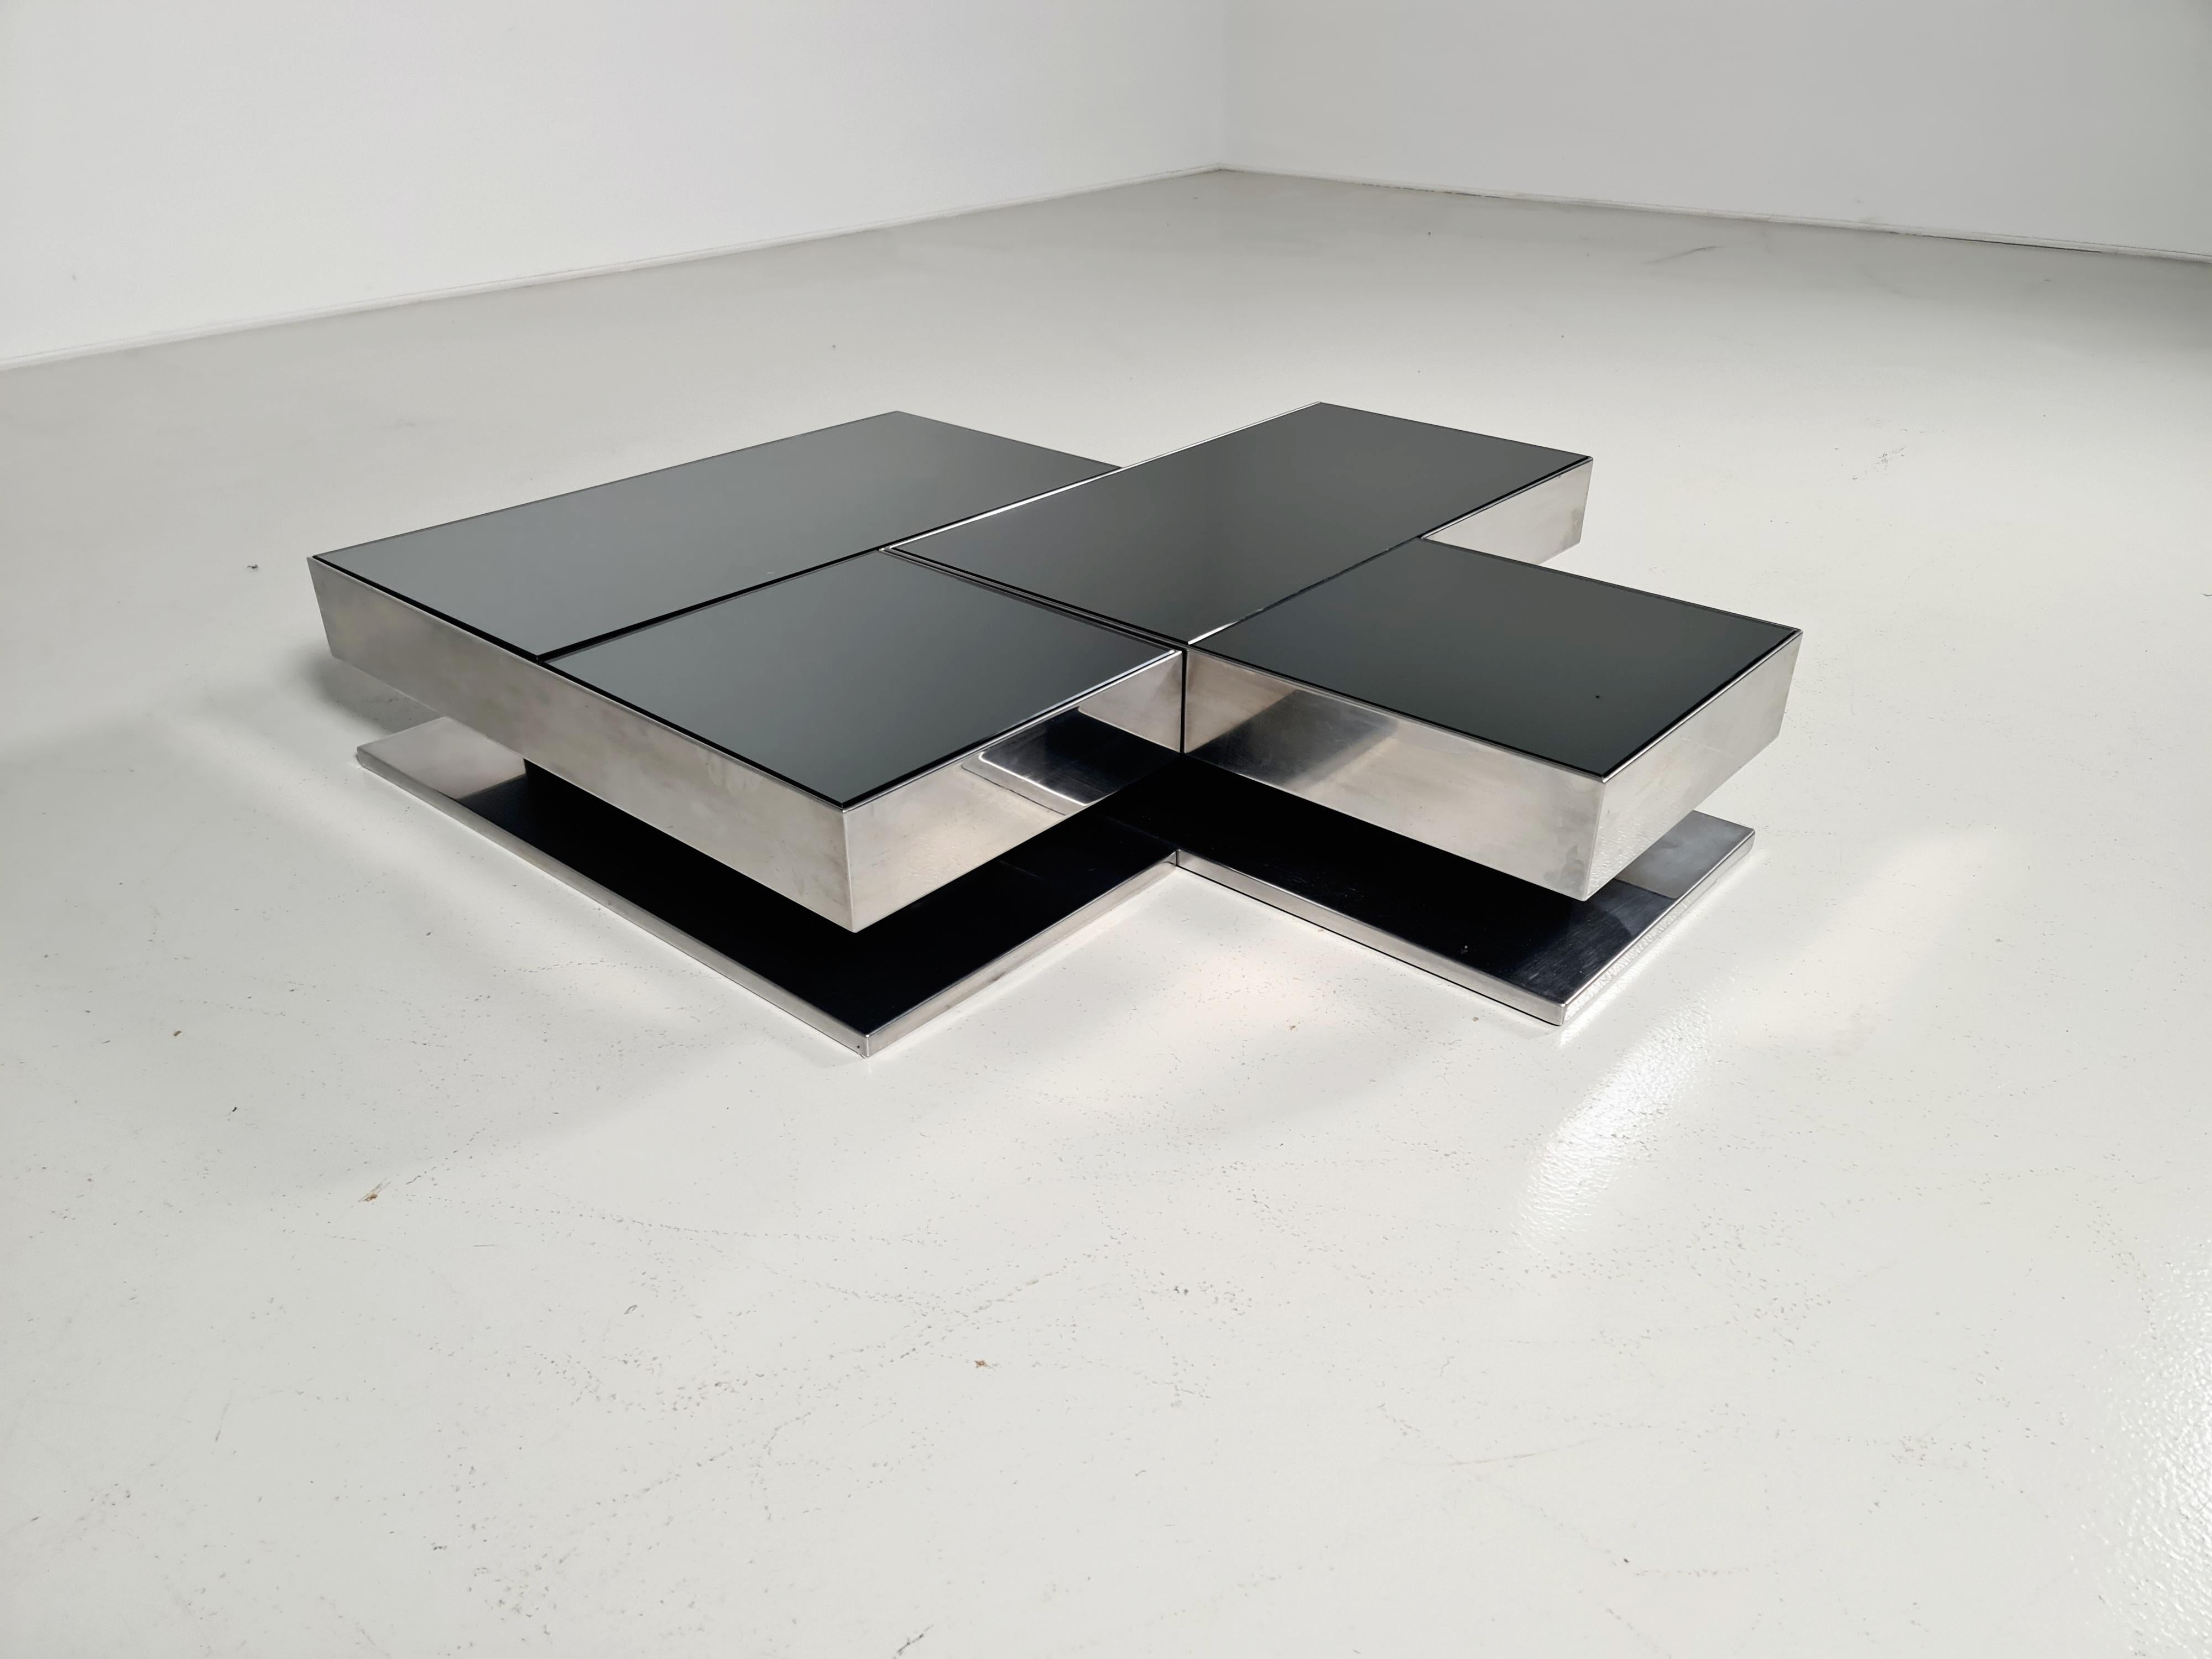 Stainless Steel Coffee Table by Giovanni Ausenda & Guido Baldi Grossi for NY Form, 1970s